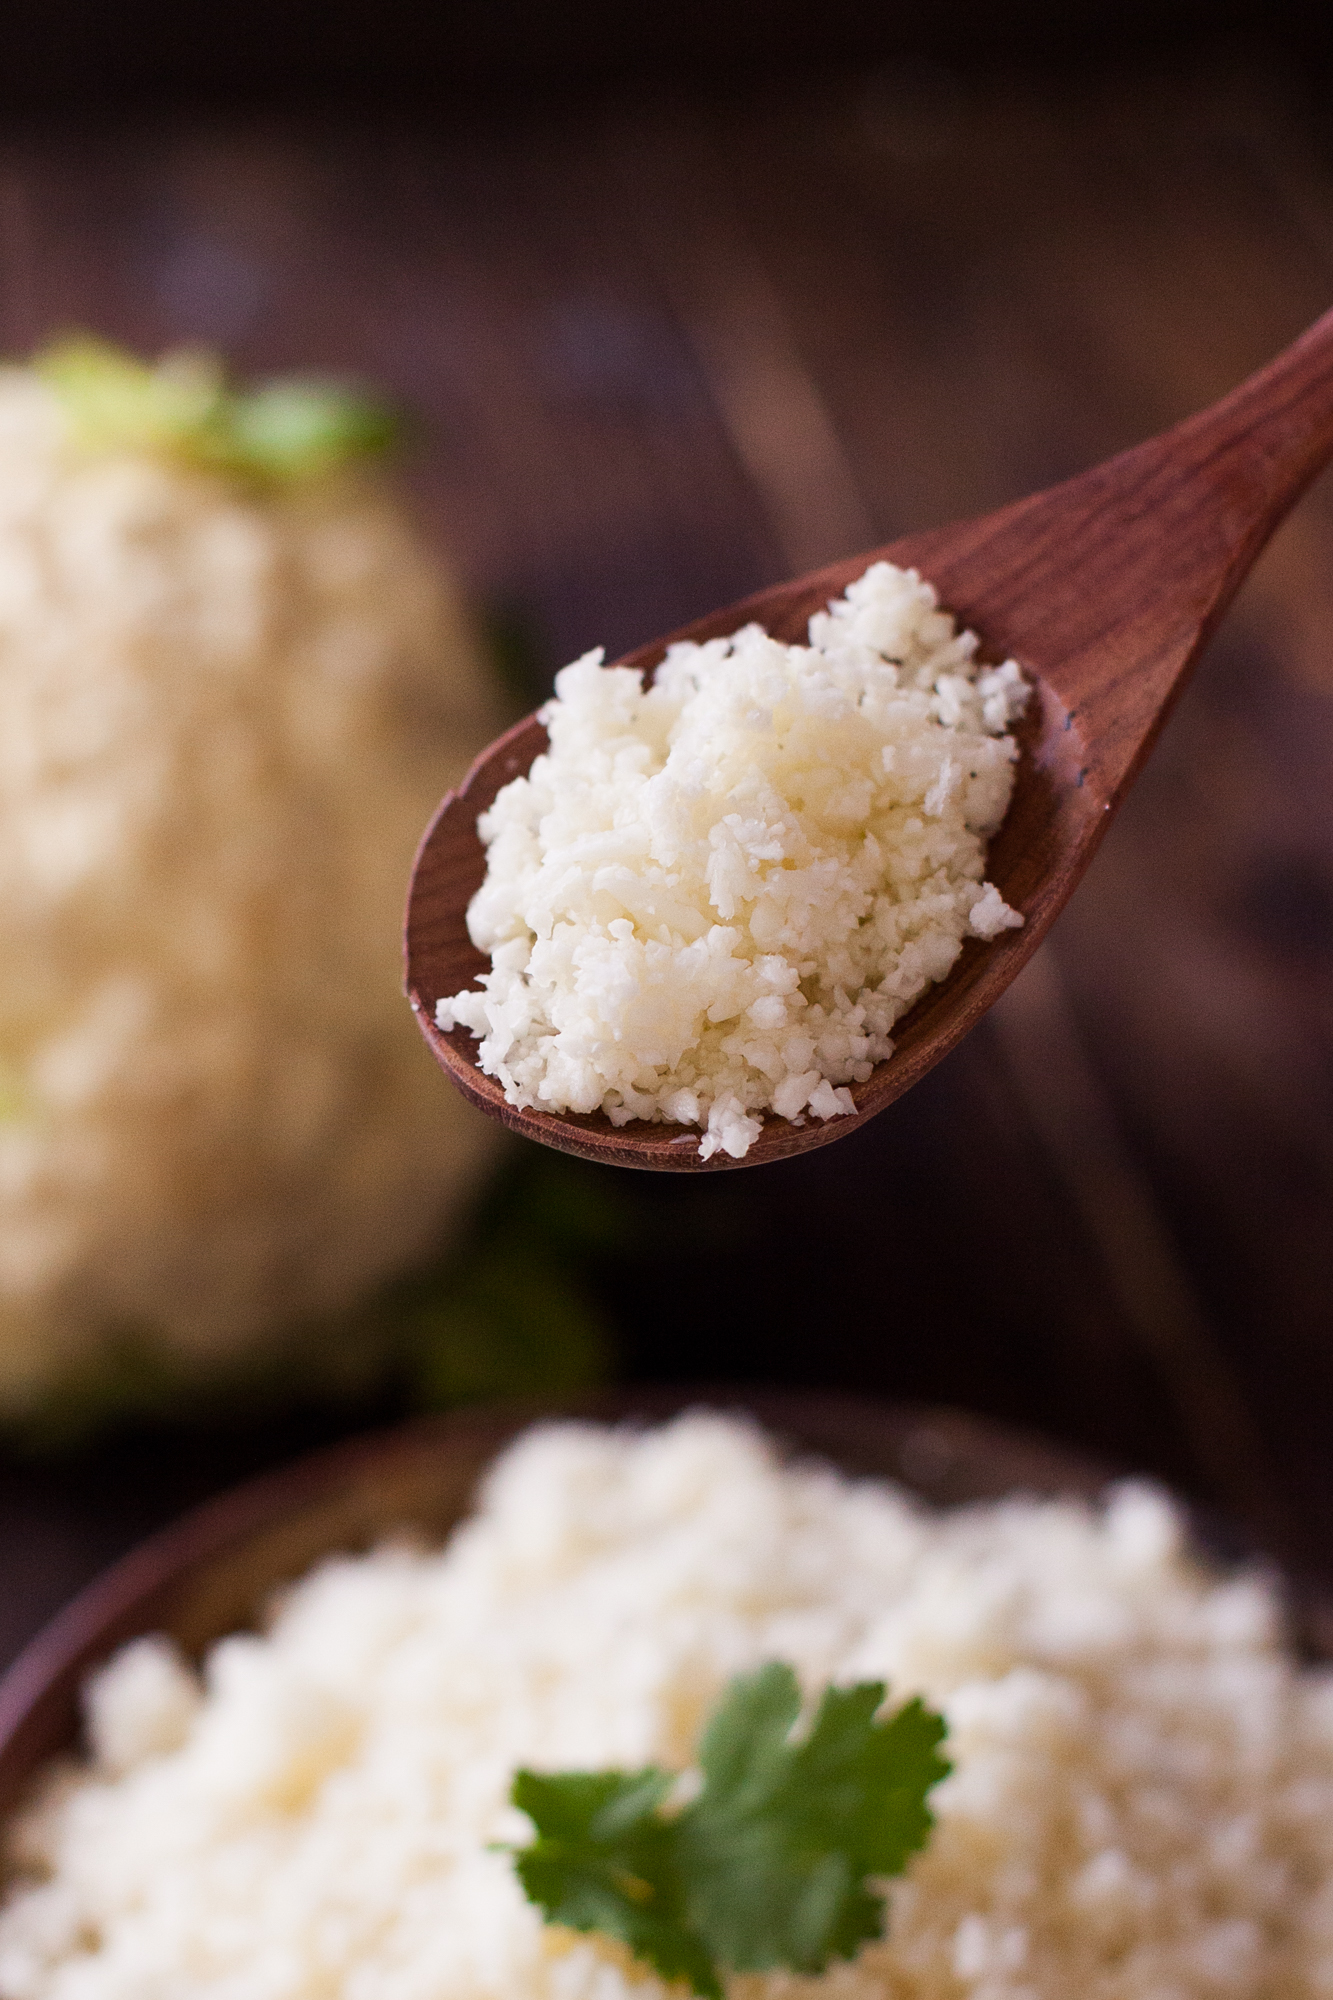 Easiest Way to Make Cauliflower Rice – You'll Love This - Senior Notions